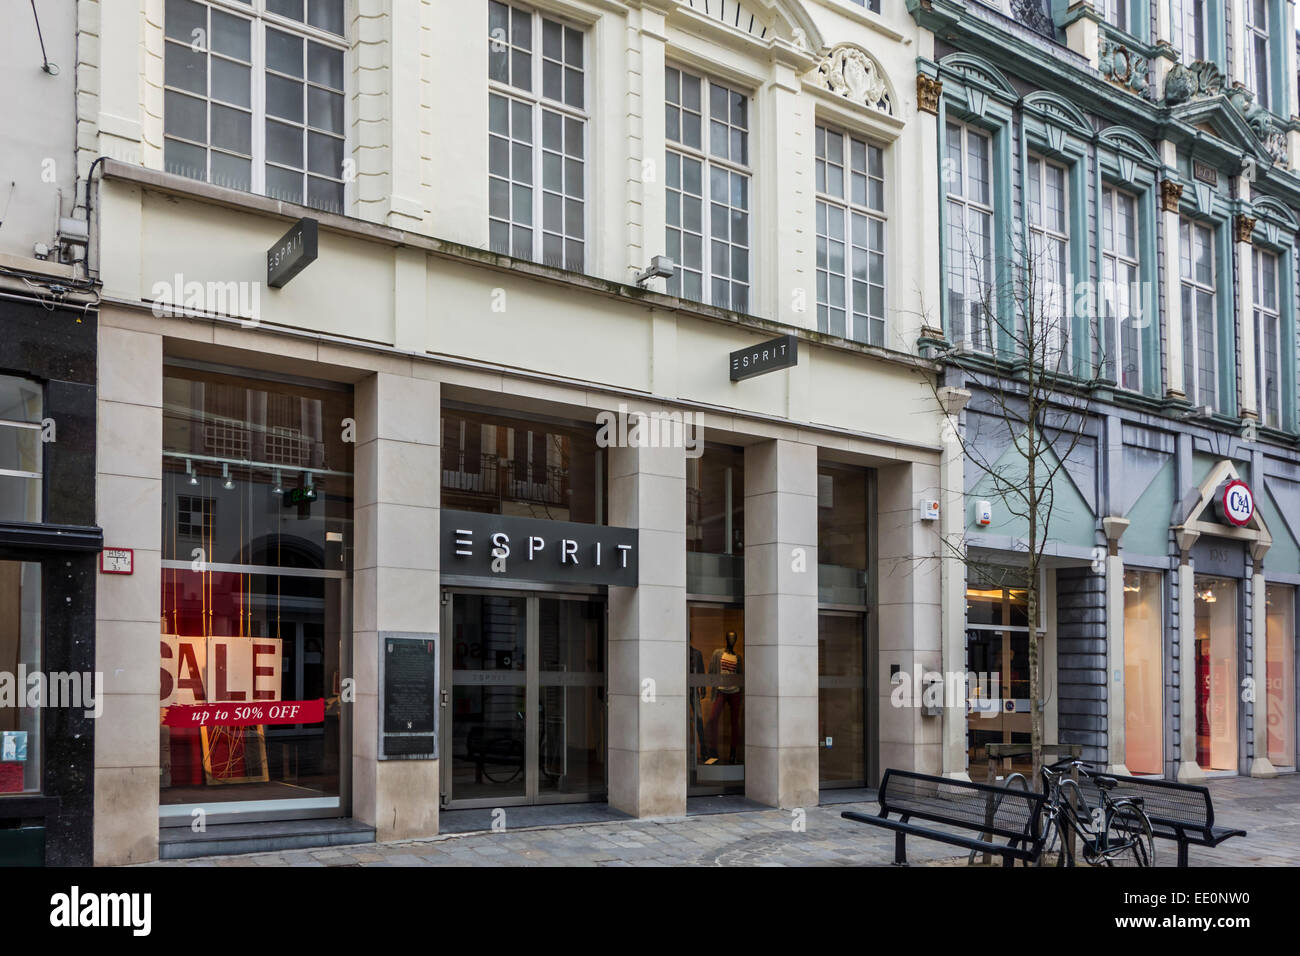 Retail store Esprit in the Veldstraat, Ghent, Belgium where American diplomats stayed and location of the 1814 Treaty of Ghent Stock Photo